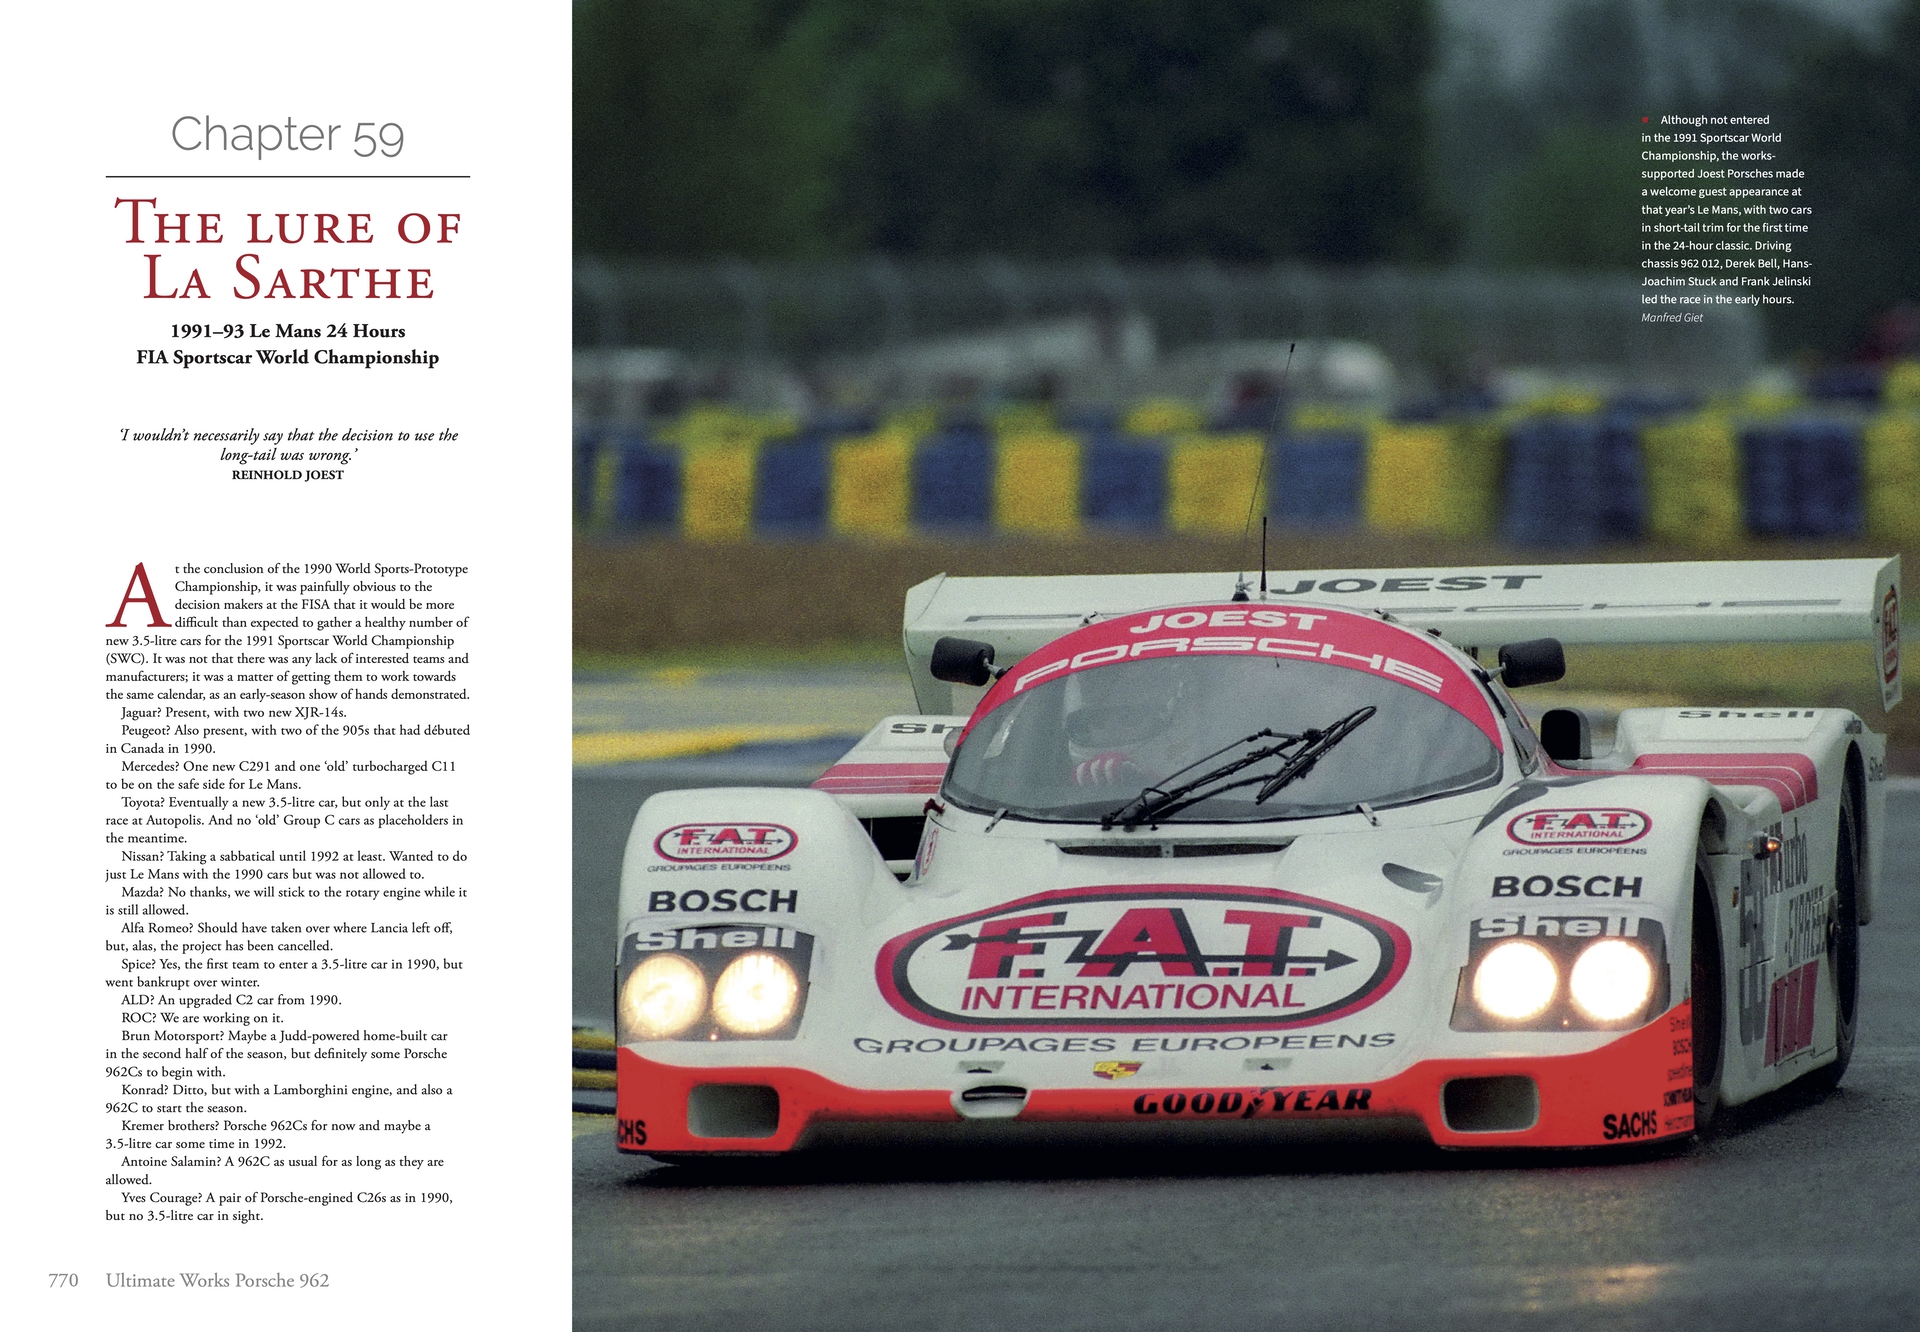 Page from Ultimate Works Porsche 962 - The Definitive History covering The Lure of La Sarthe